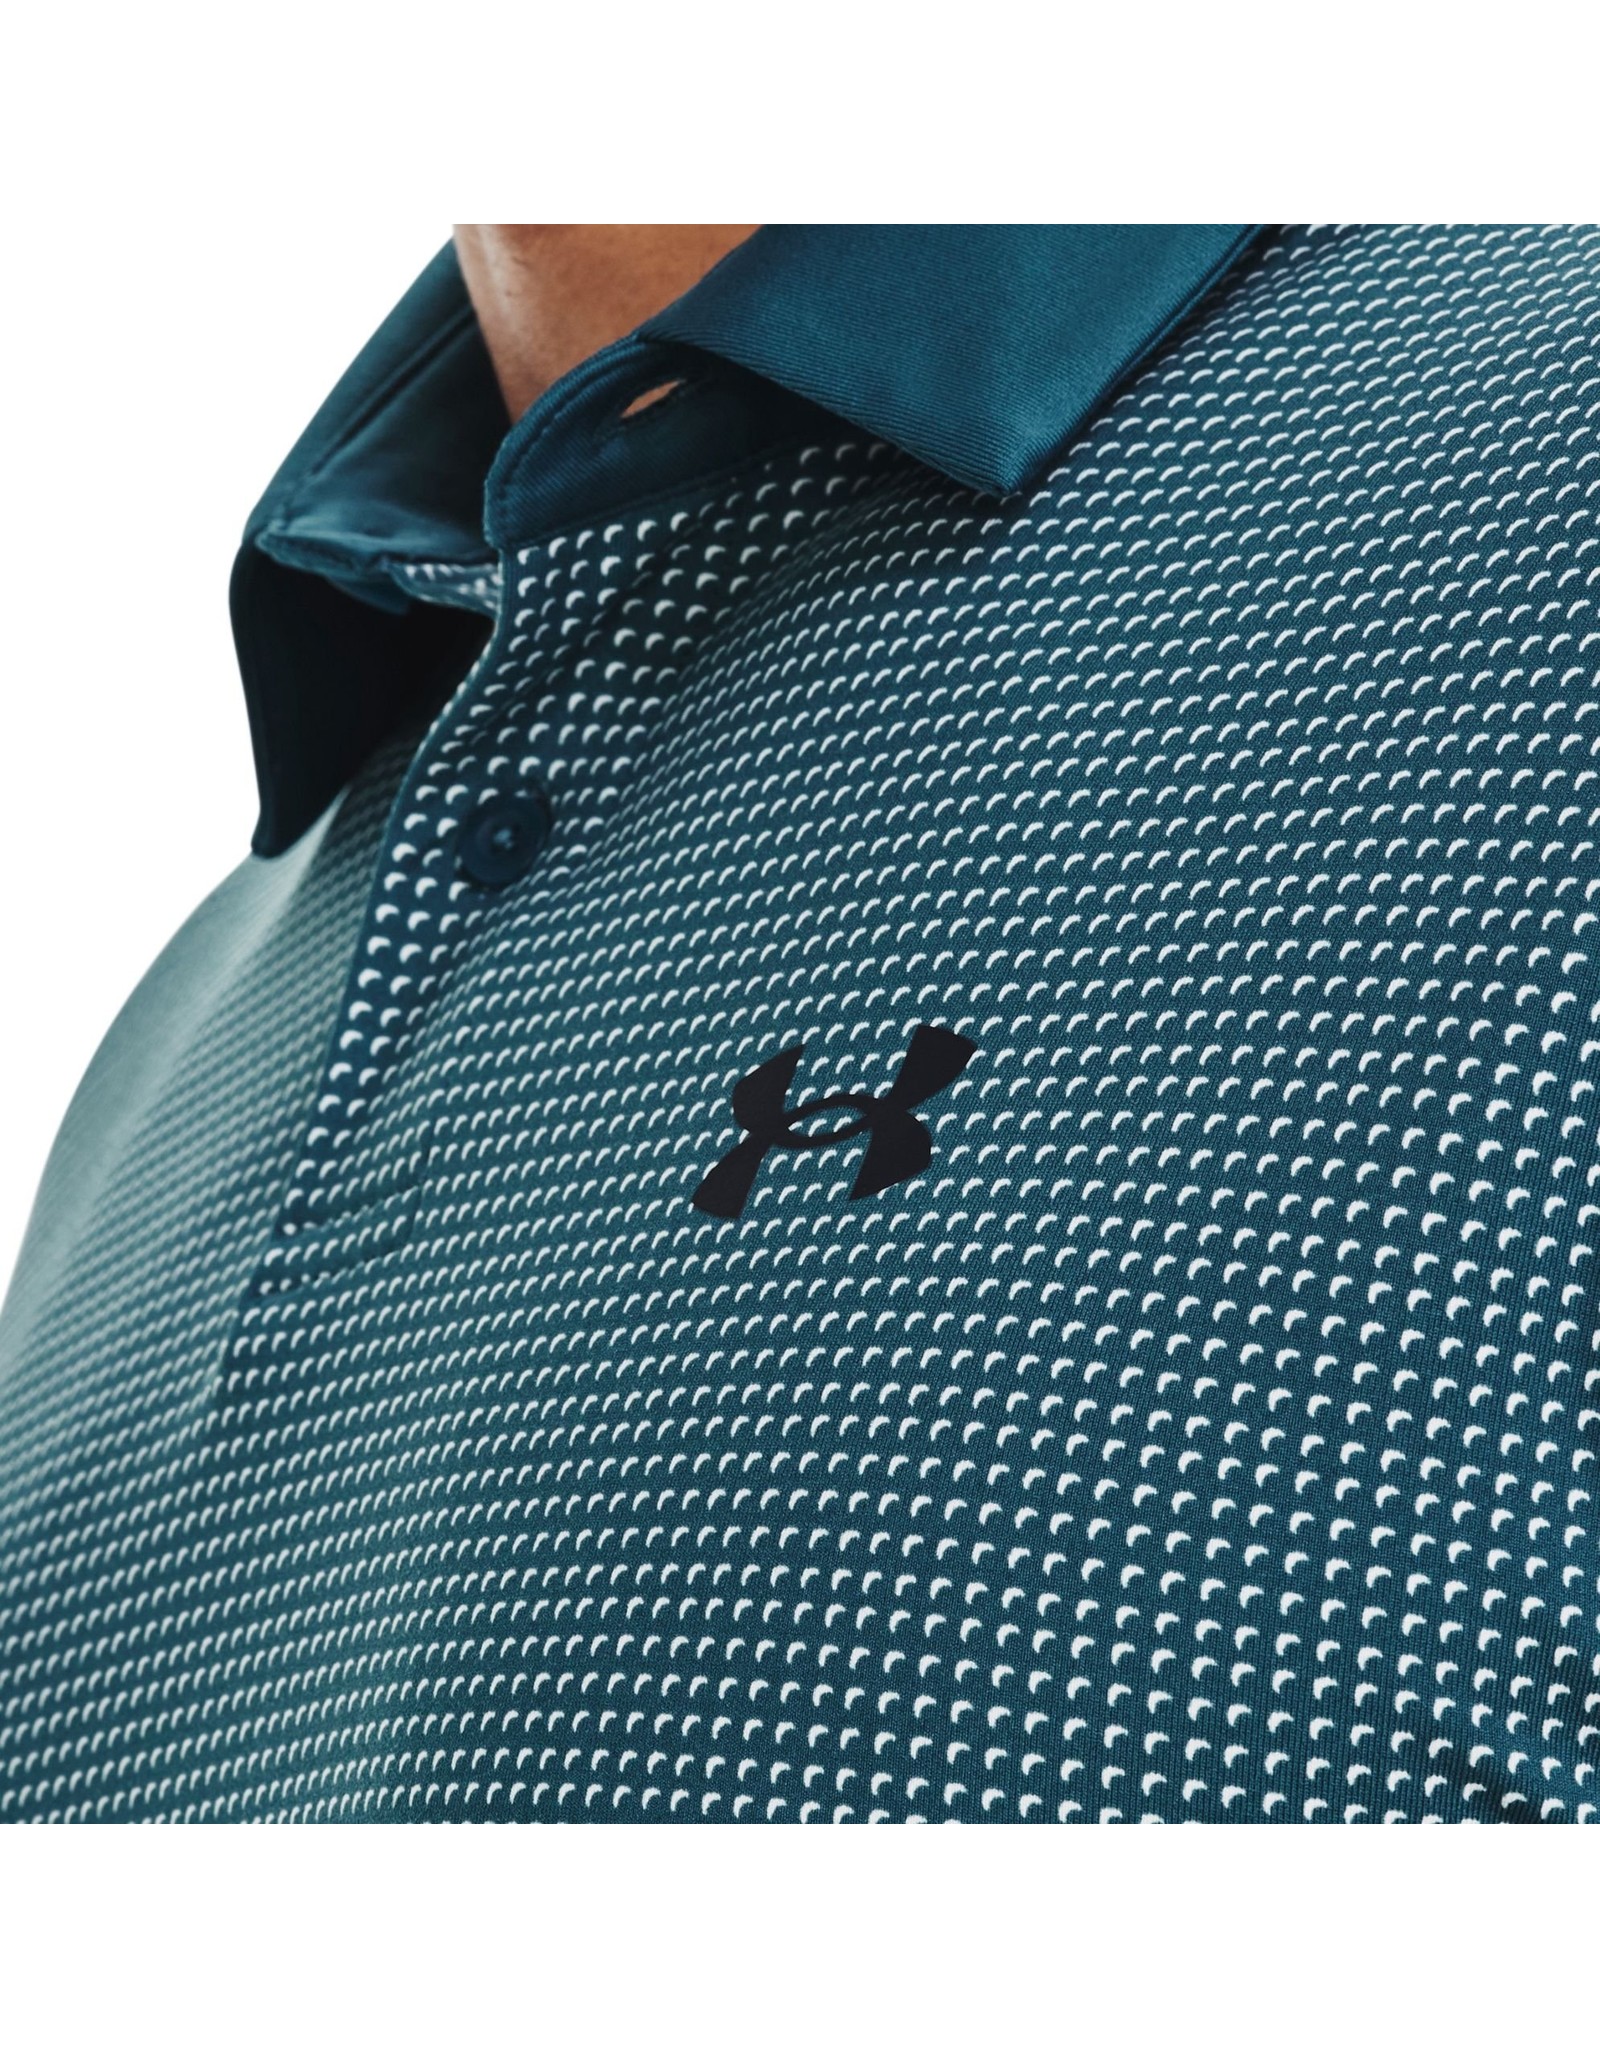 Under Armour Under Armour Mens Tee To Green Printed Polo